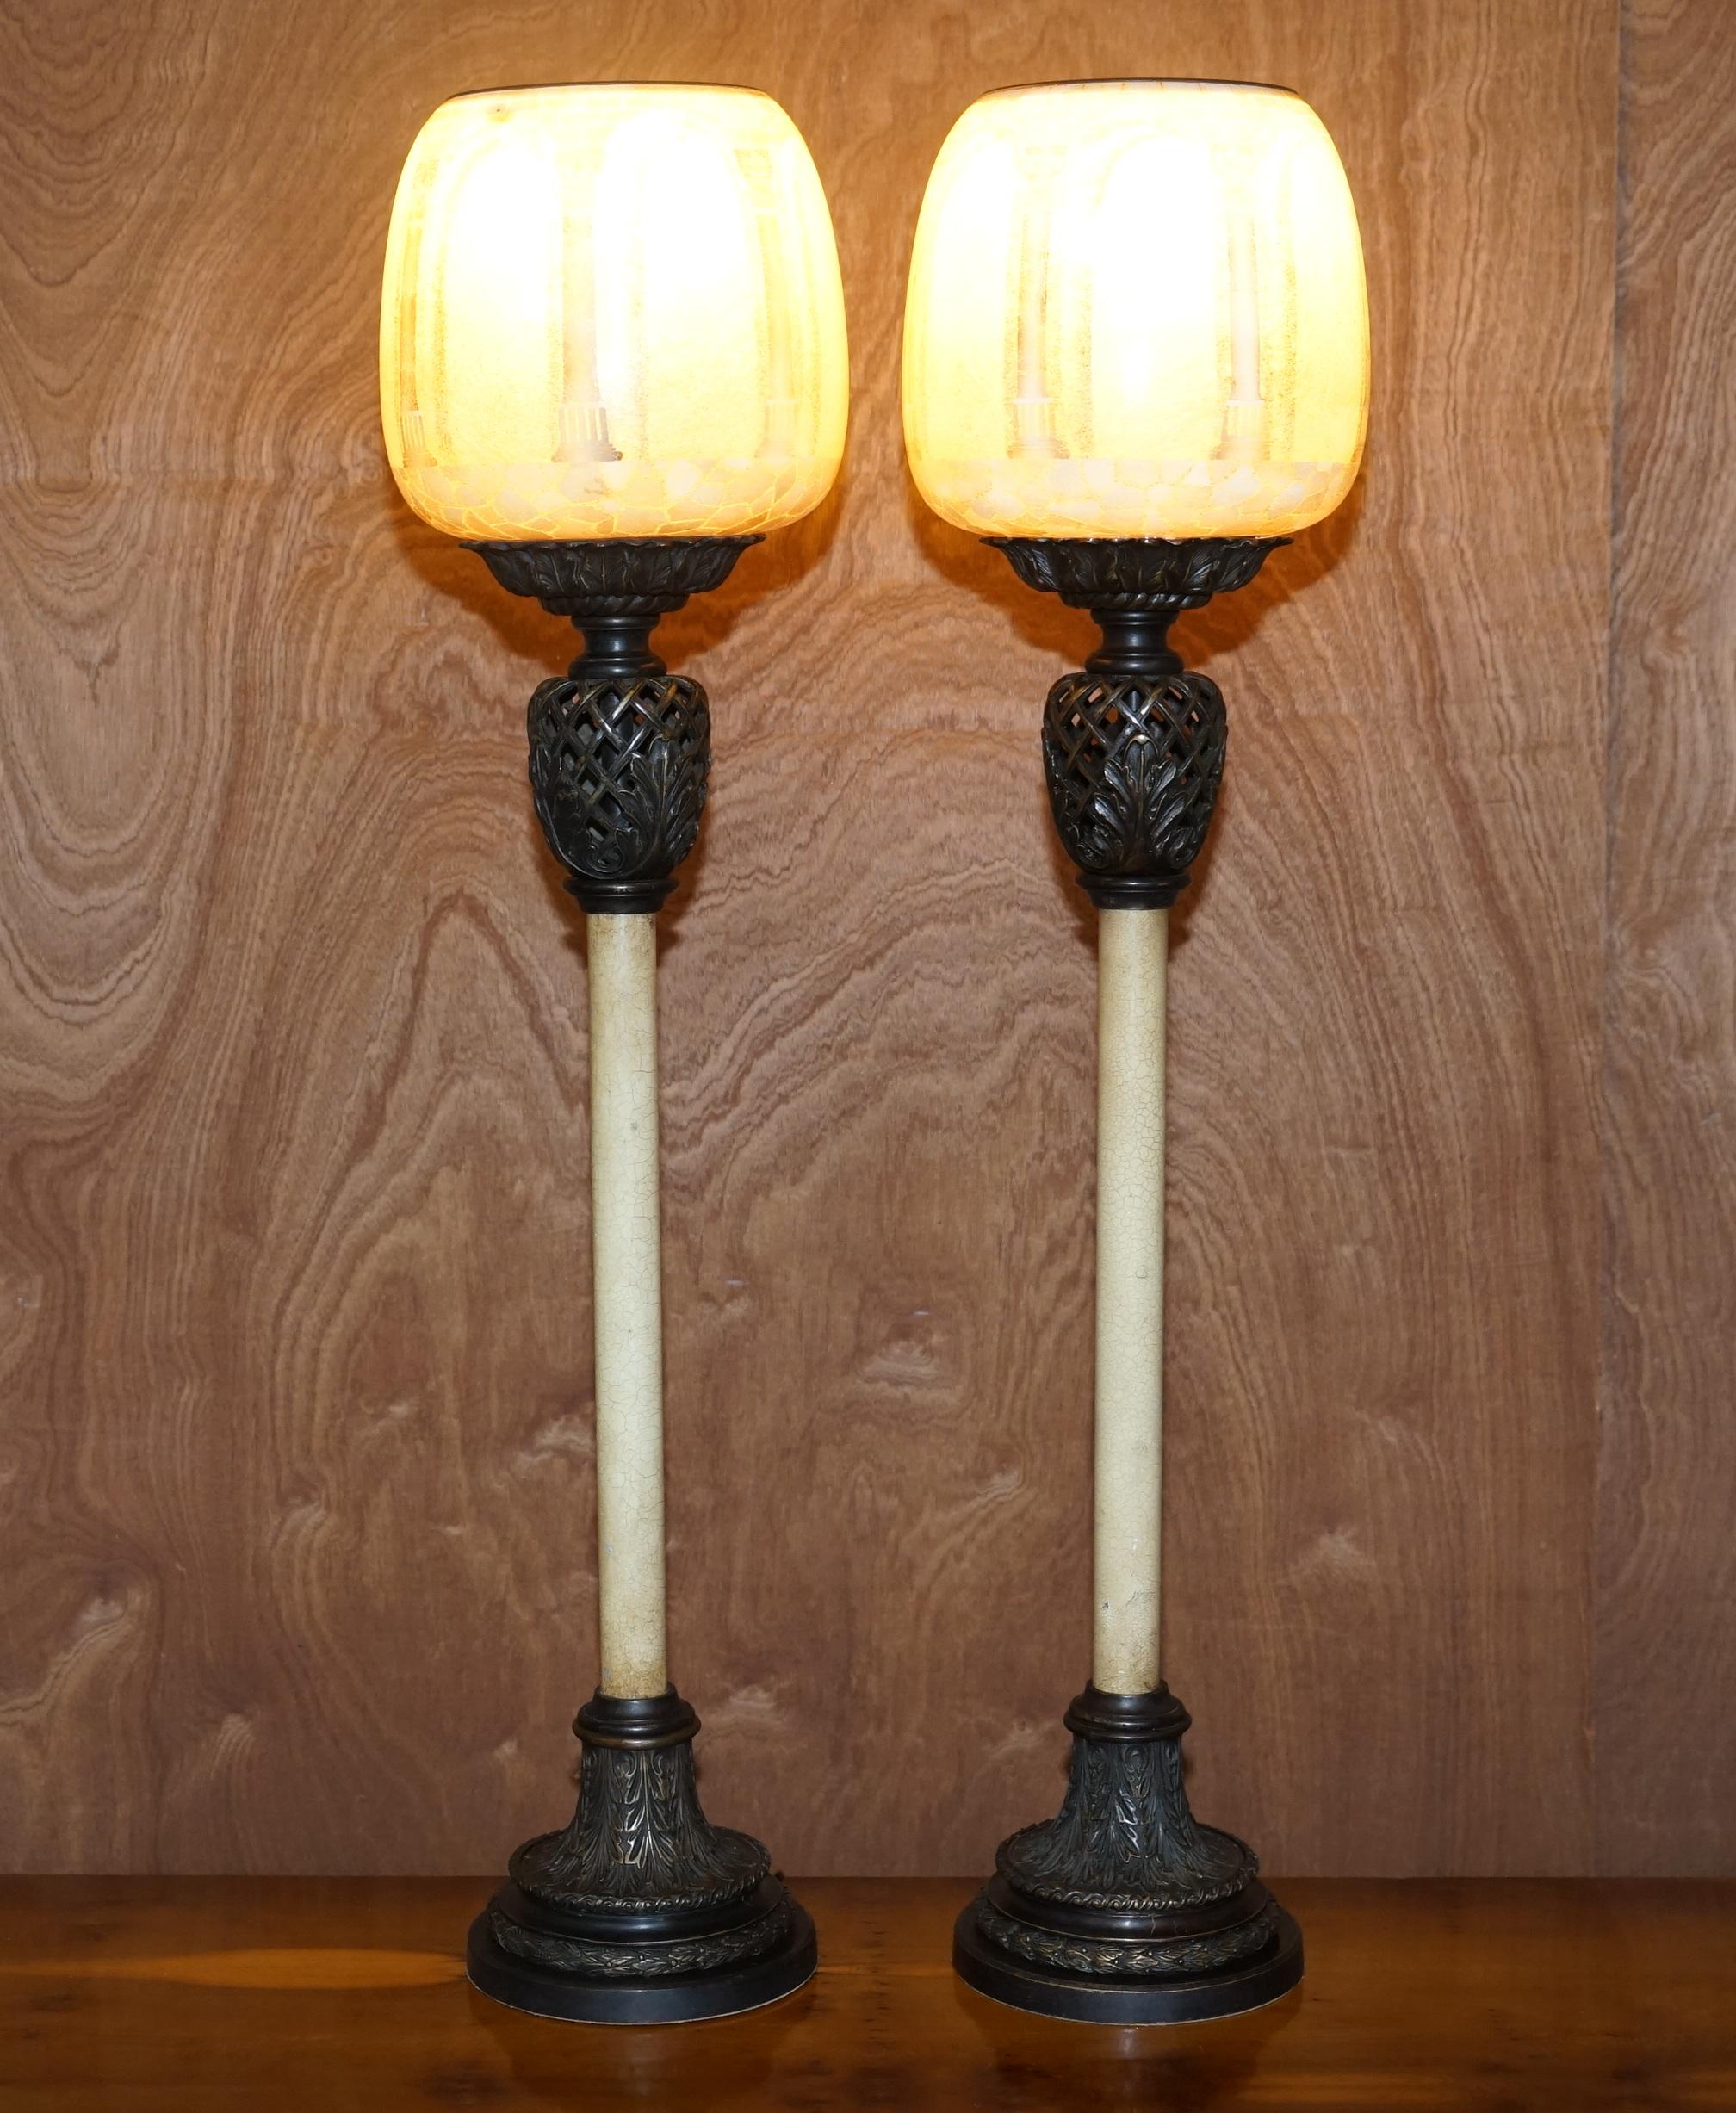 Exquisite Pair of Large Vintage Table Lamps with Corinthian Roman Pillar Shades For Sale 13